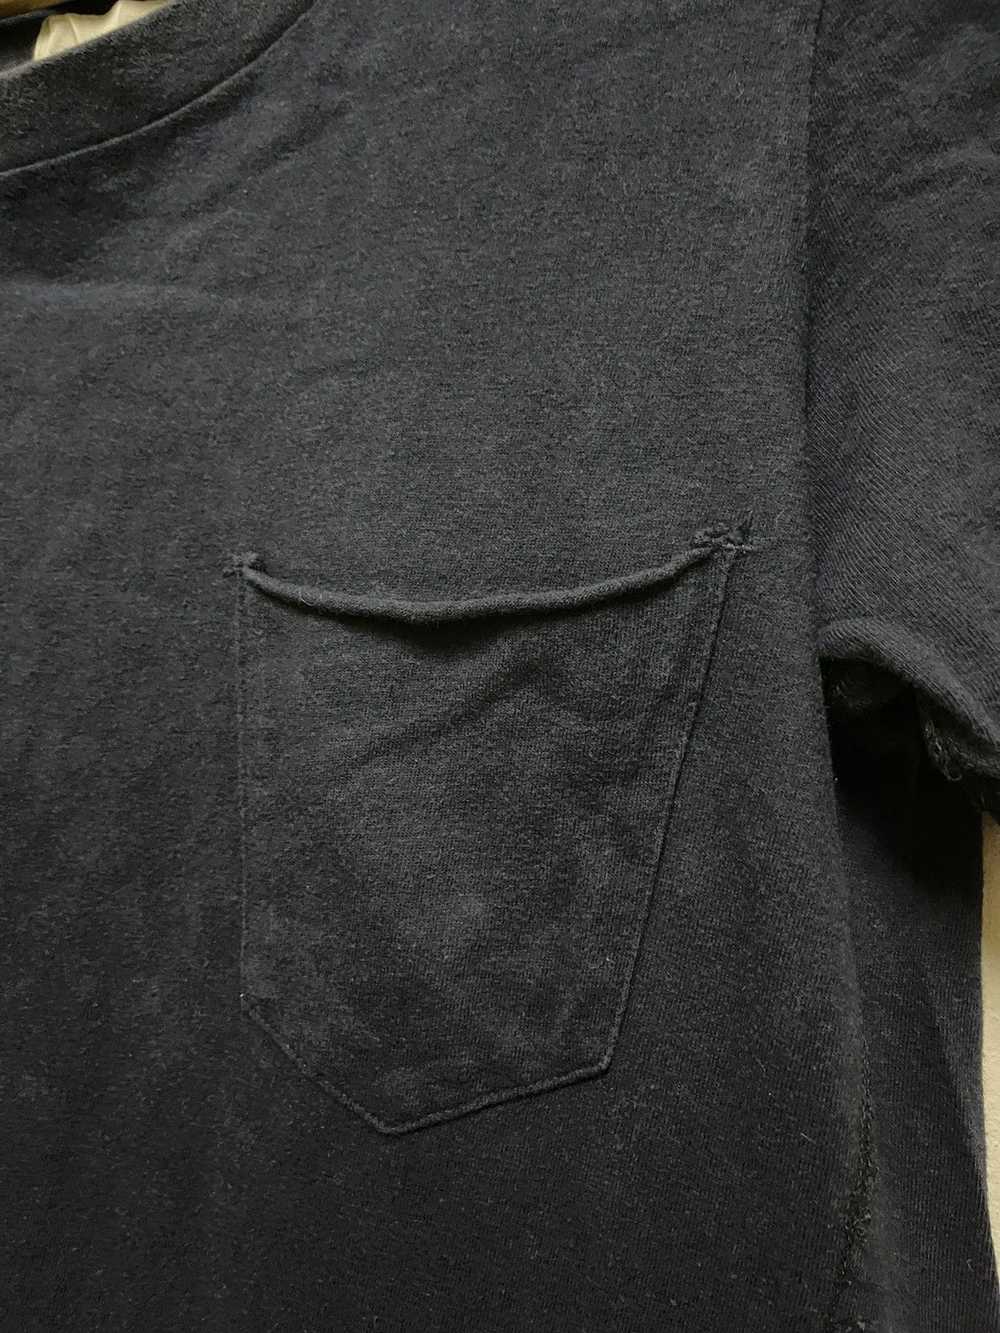 Bed J W Ford Bed JW Ford T Shirt Pocket Faded - image 7